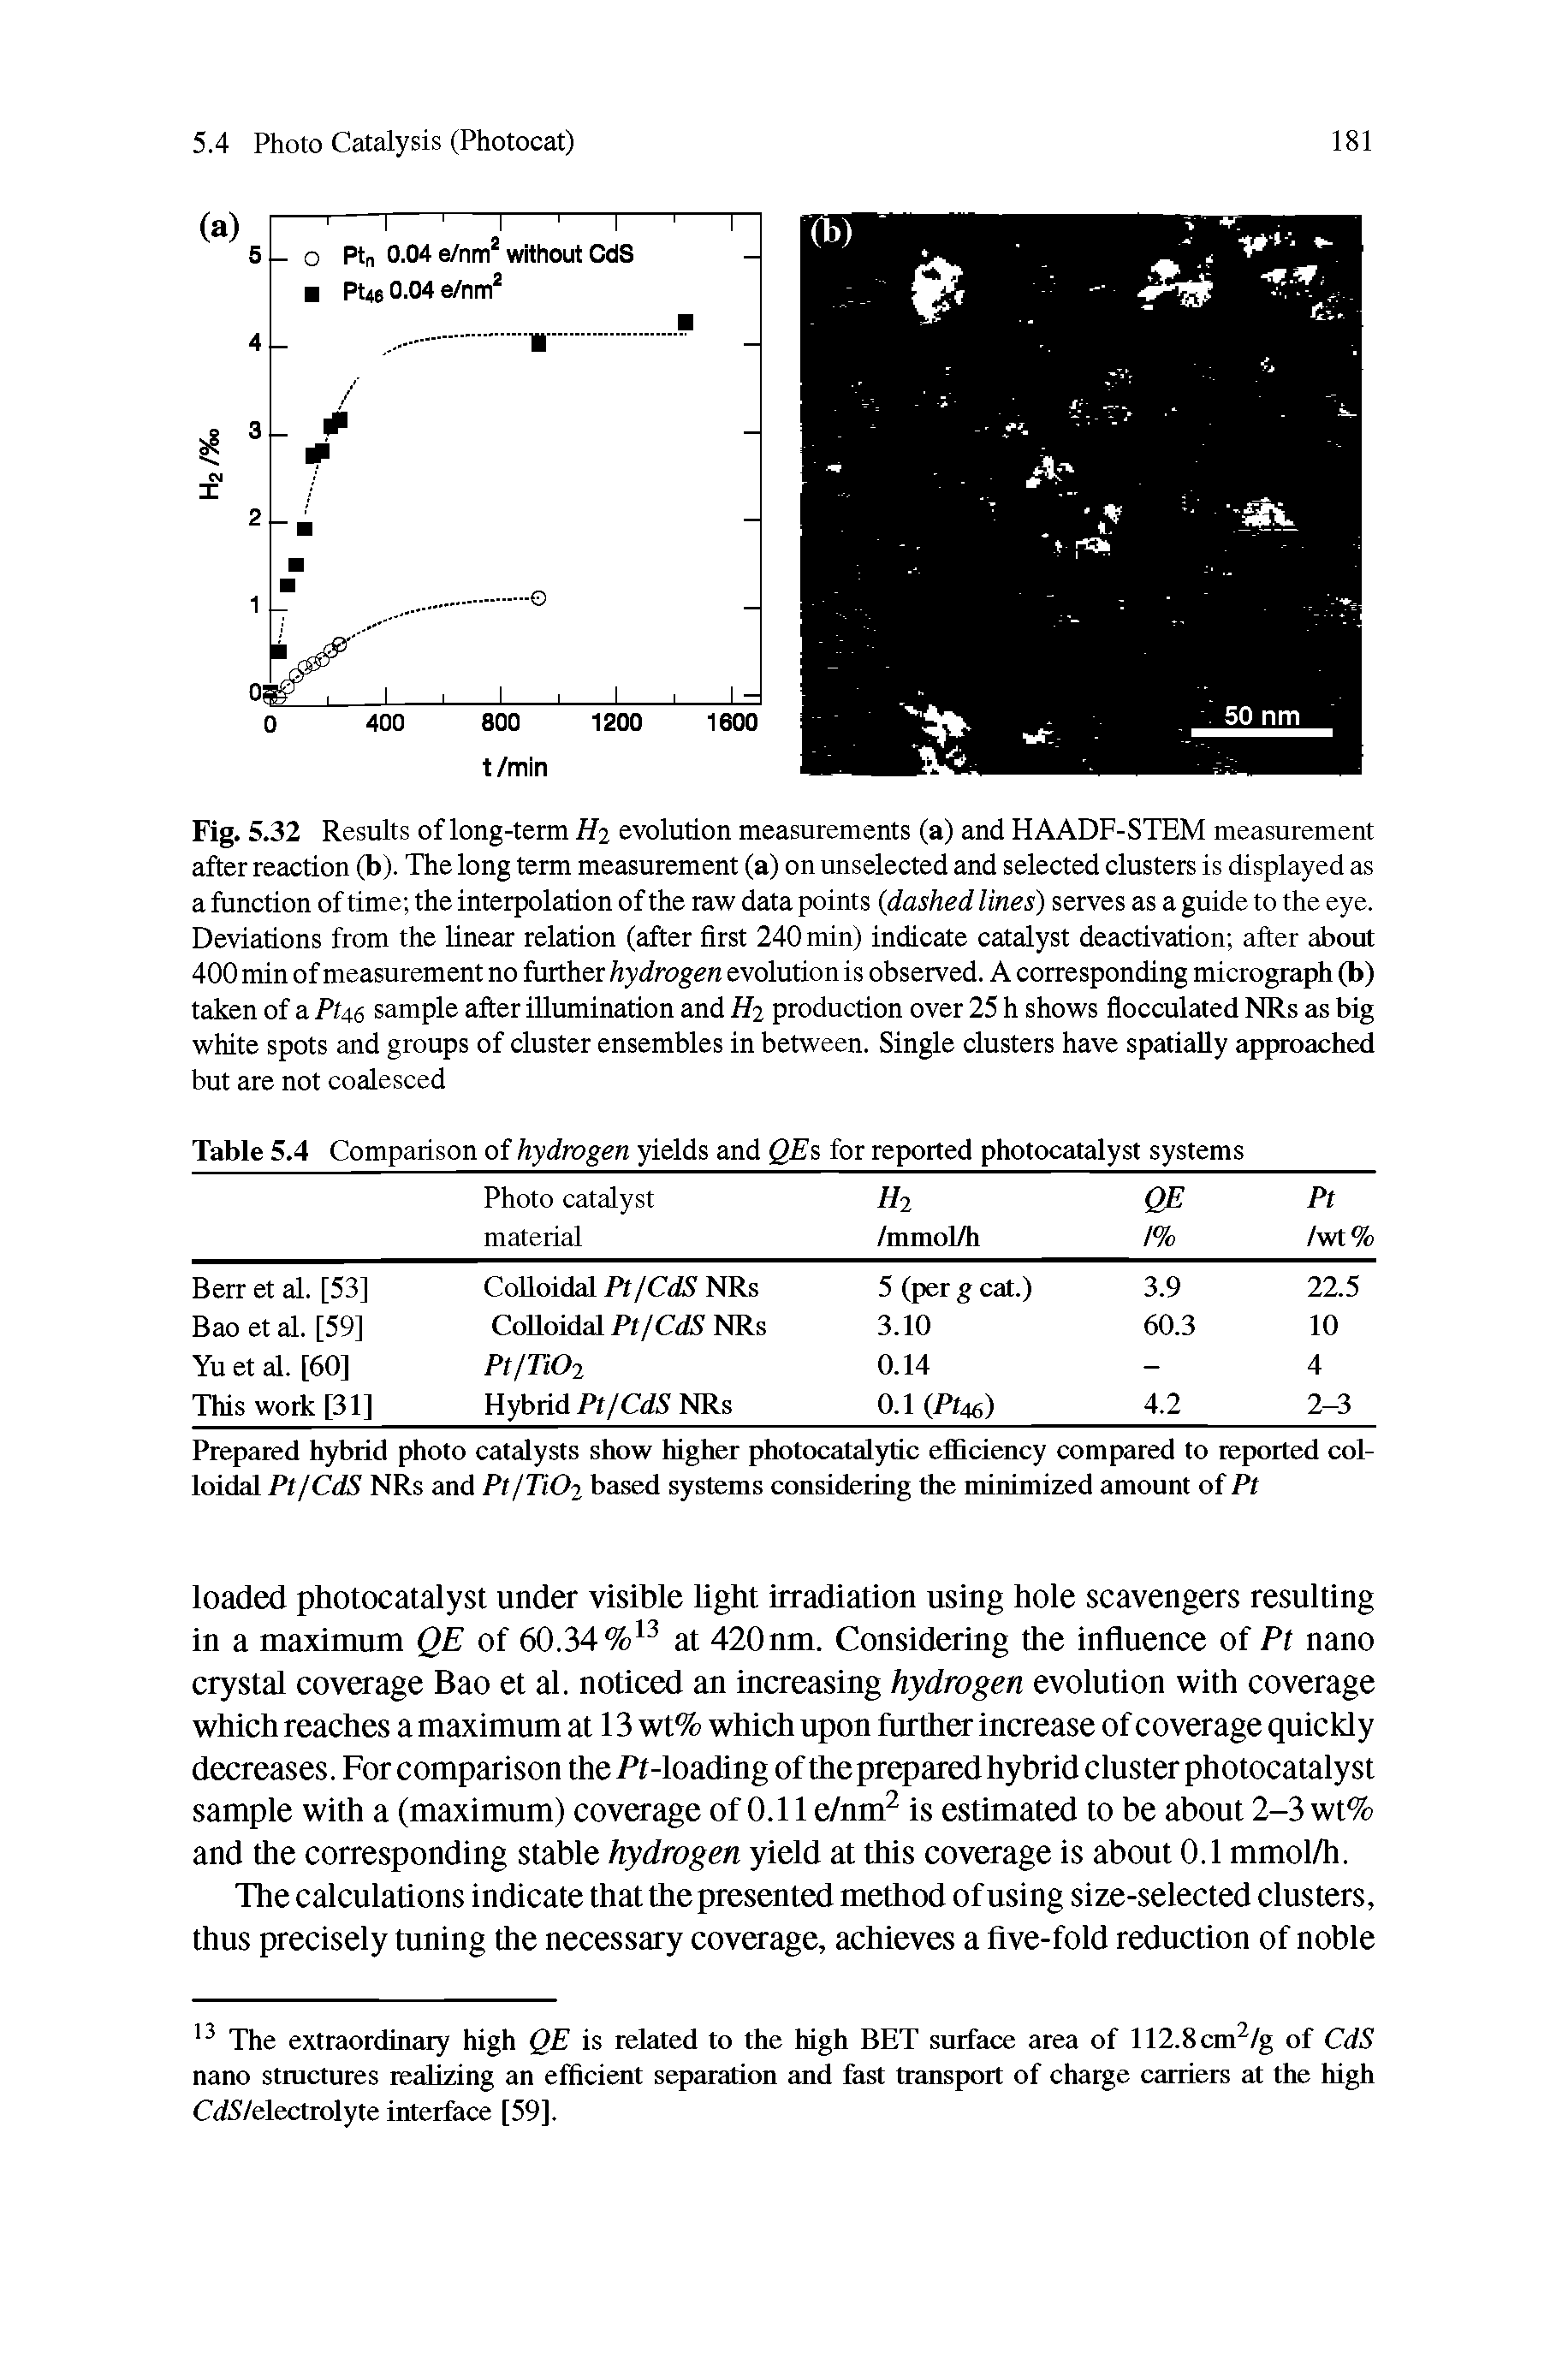 Fig. 5.32 Results of long-term H2 evolution measurements (a) and HAADF-STEM measurement after reaction (b). The long term measurement (a) on unselected and selected clusters is displayed as a function of time the interpolation of the raw data points dashed lines) serves as a guide to the eye. Deviations from the linear relation (after first 240 min) indicate catalyst deactivation after about 400 min of measurement no further hydrogen evolution is observed. A corresponding micrograph (b) taken of a FUe sample after illumination and H2 production over 25 h shows flocculated NRs as big white spots and groups of cluster ensembles in between. Single clusters have spatially approached but are not coalesced...